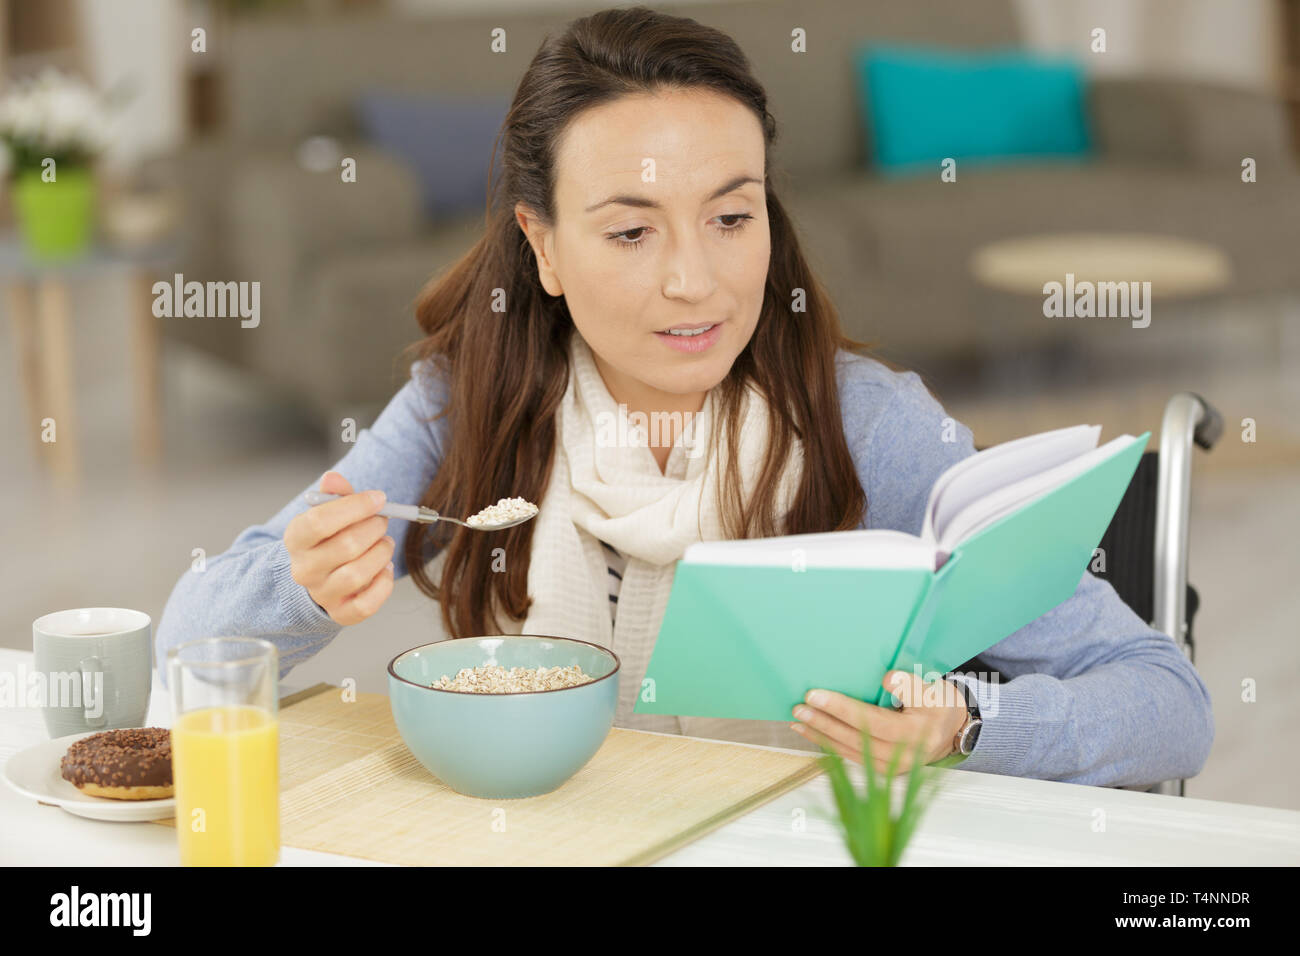 young disabled woman reading a book while eating breakfast Stock Photo